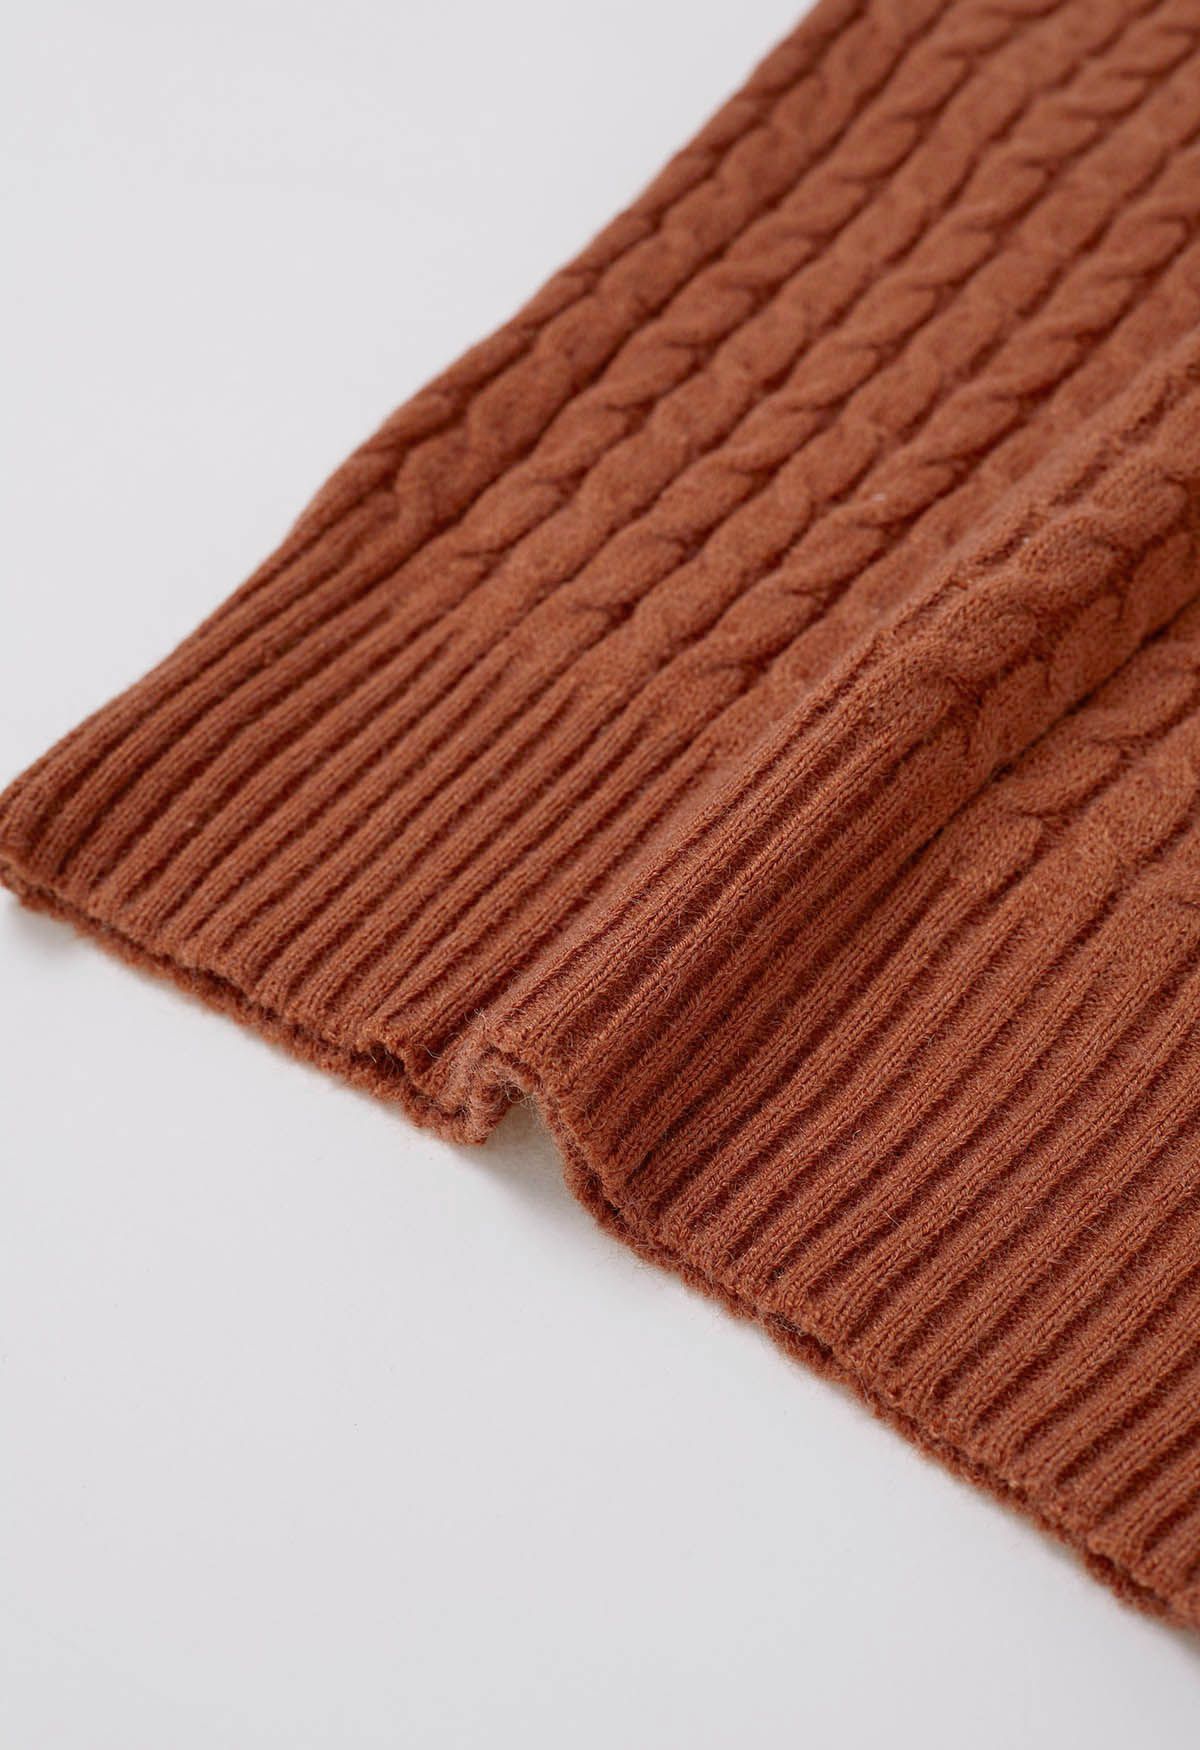 Contrast Flap Collar Cable Knit Sweater in Pumpkin